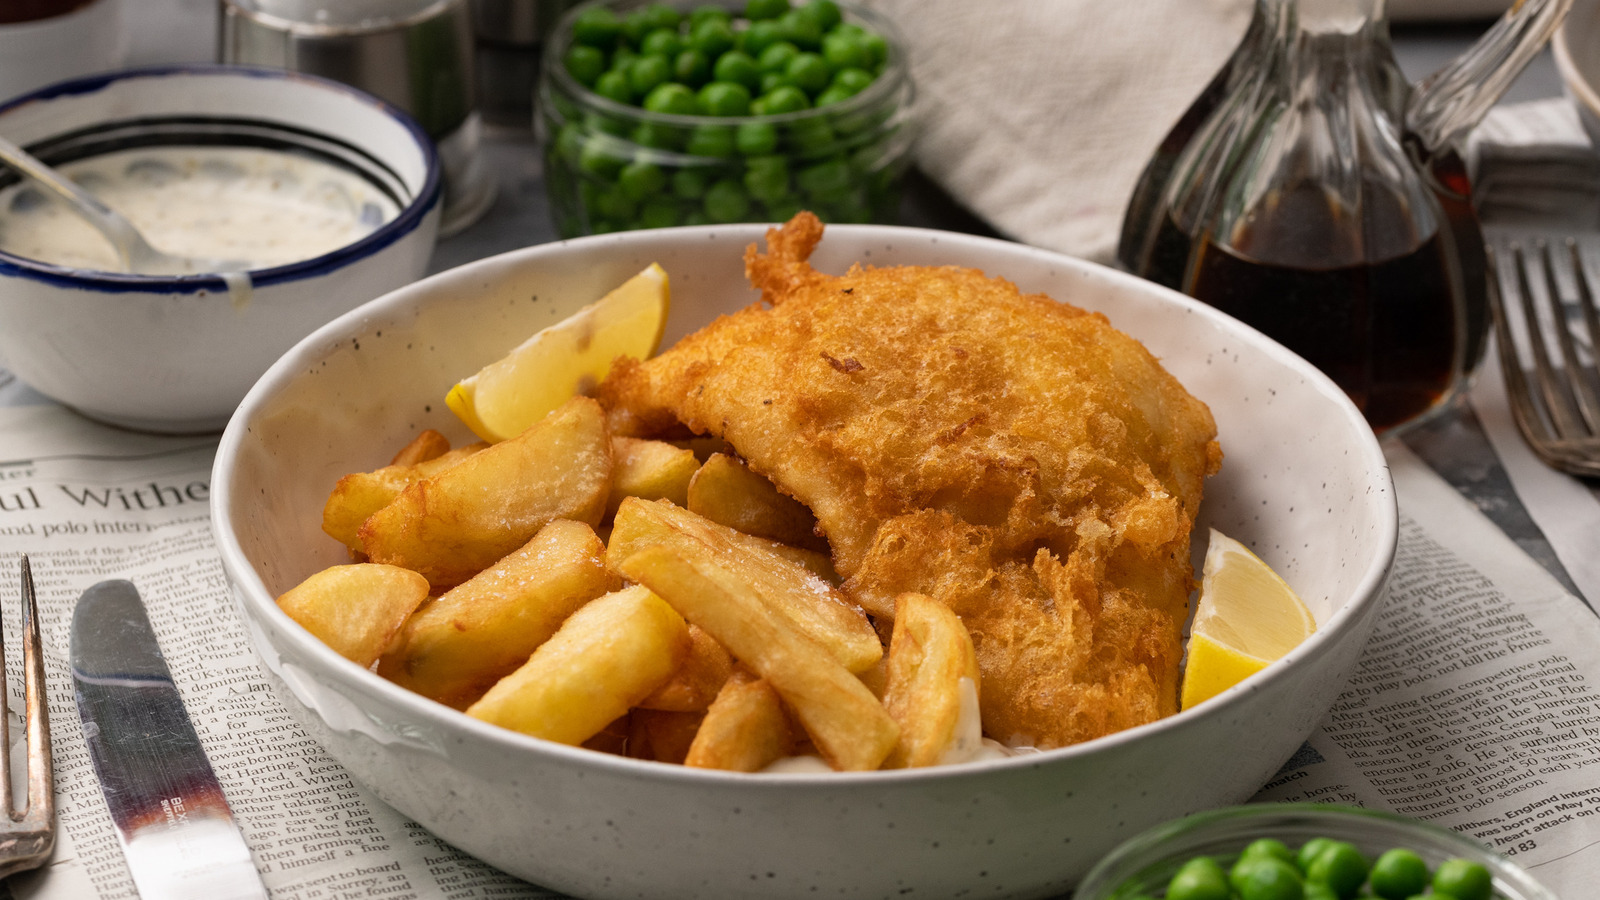 https://www.foodrepublic.com/img/gallery/golden-beer-battered-fish-and-chips-recipe/l-intro-1684172569.jpg